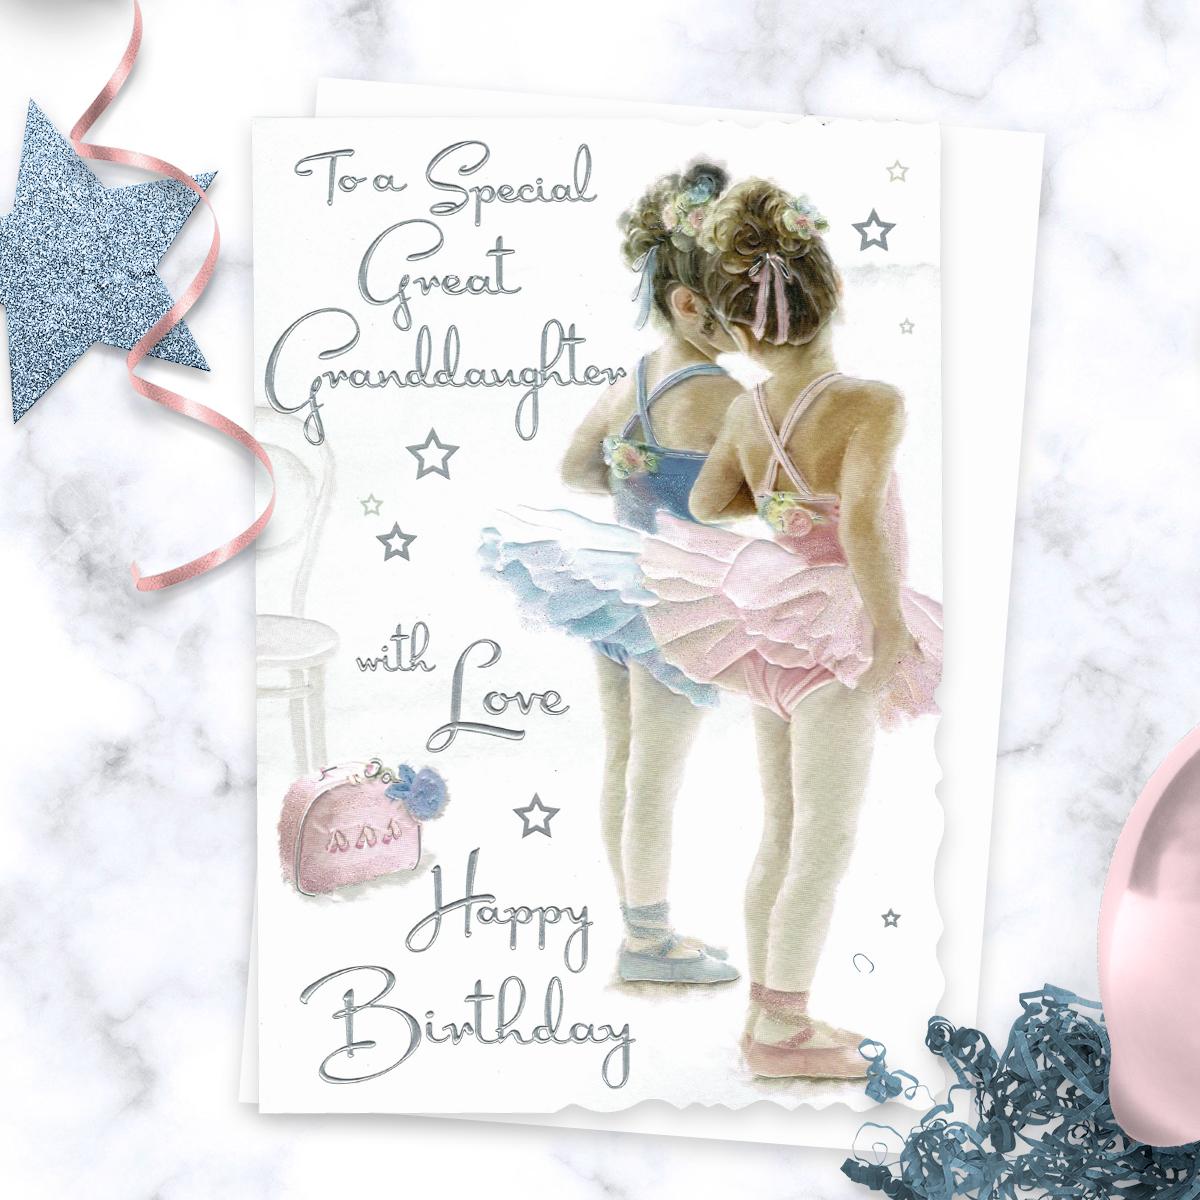 'To A Special Great Granddaughter With Love Happy Birthday' Card Featuring Two Little Girls Dressed For Ballet Class. With Added Sparkle And Silver Foil Detail. Complete With White Envelope